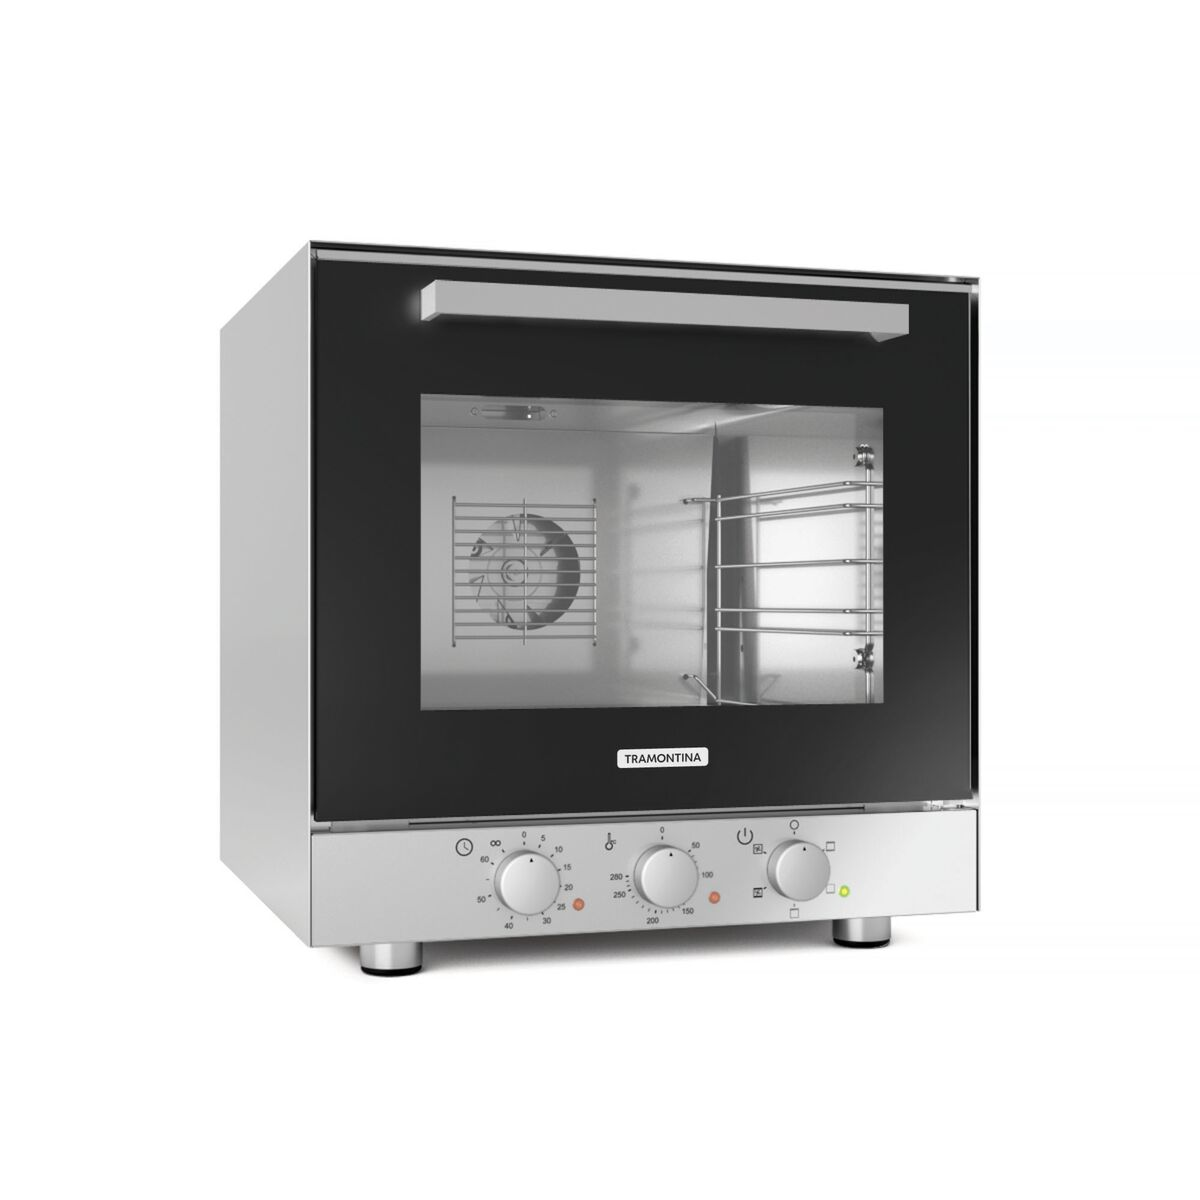 Tramontina multi-function electric convection oven 590x620mm